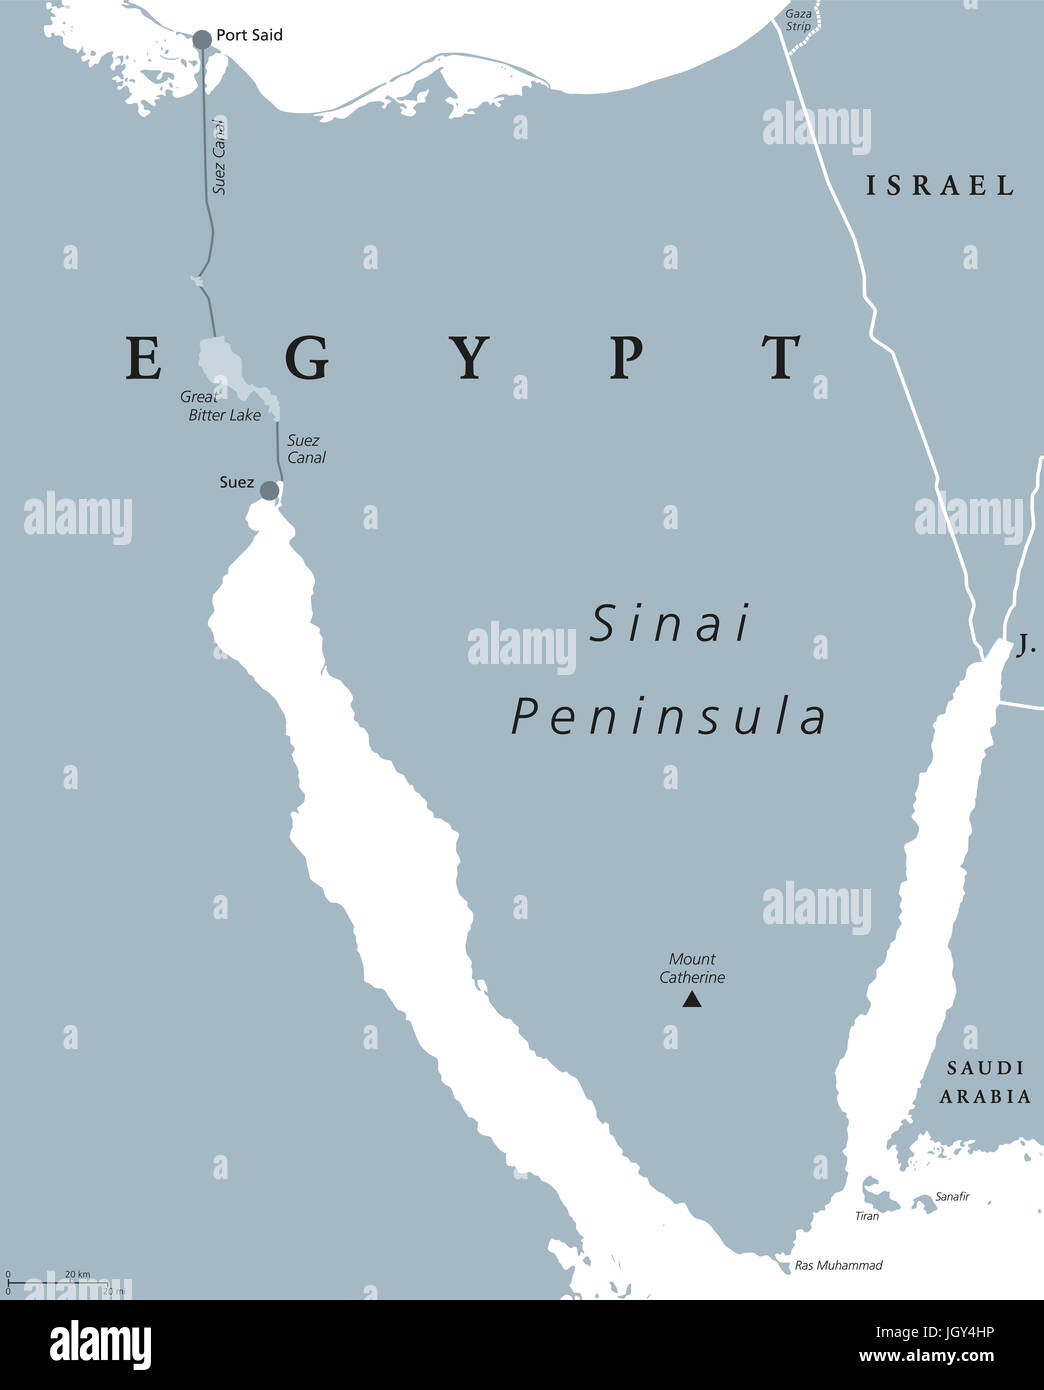 Sinai Peninsula political map. Land bridge in Egypt situated between Mediterranean Sea and Red Sea. With Suez Canal. Gray illustration. Stock Photo